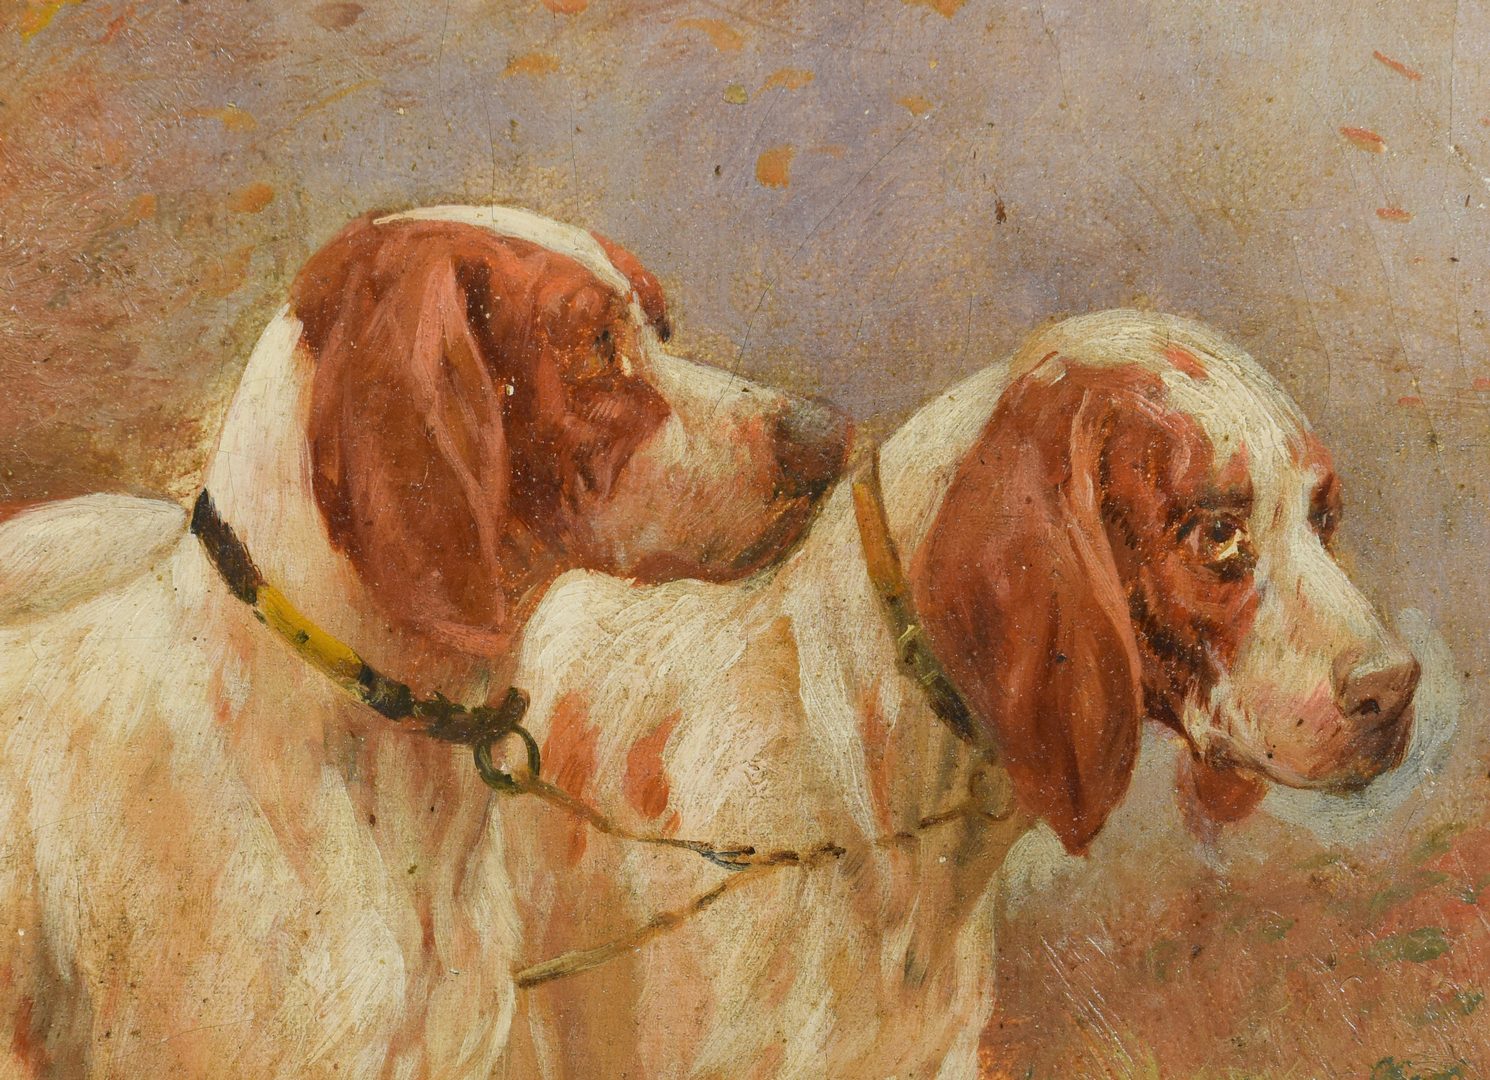 Lot 647:  English Pointers Oil on Canvas